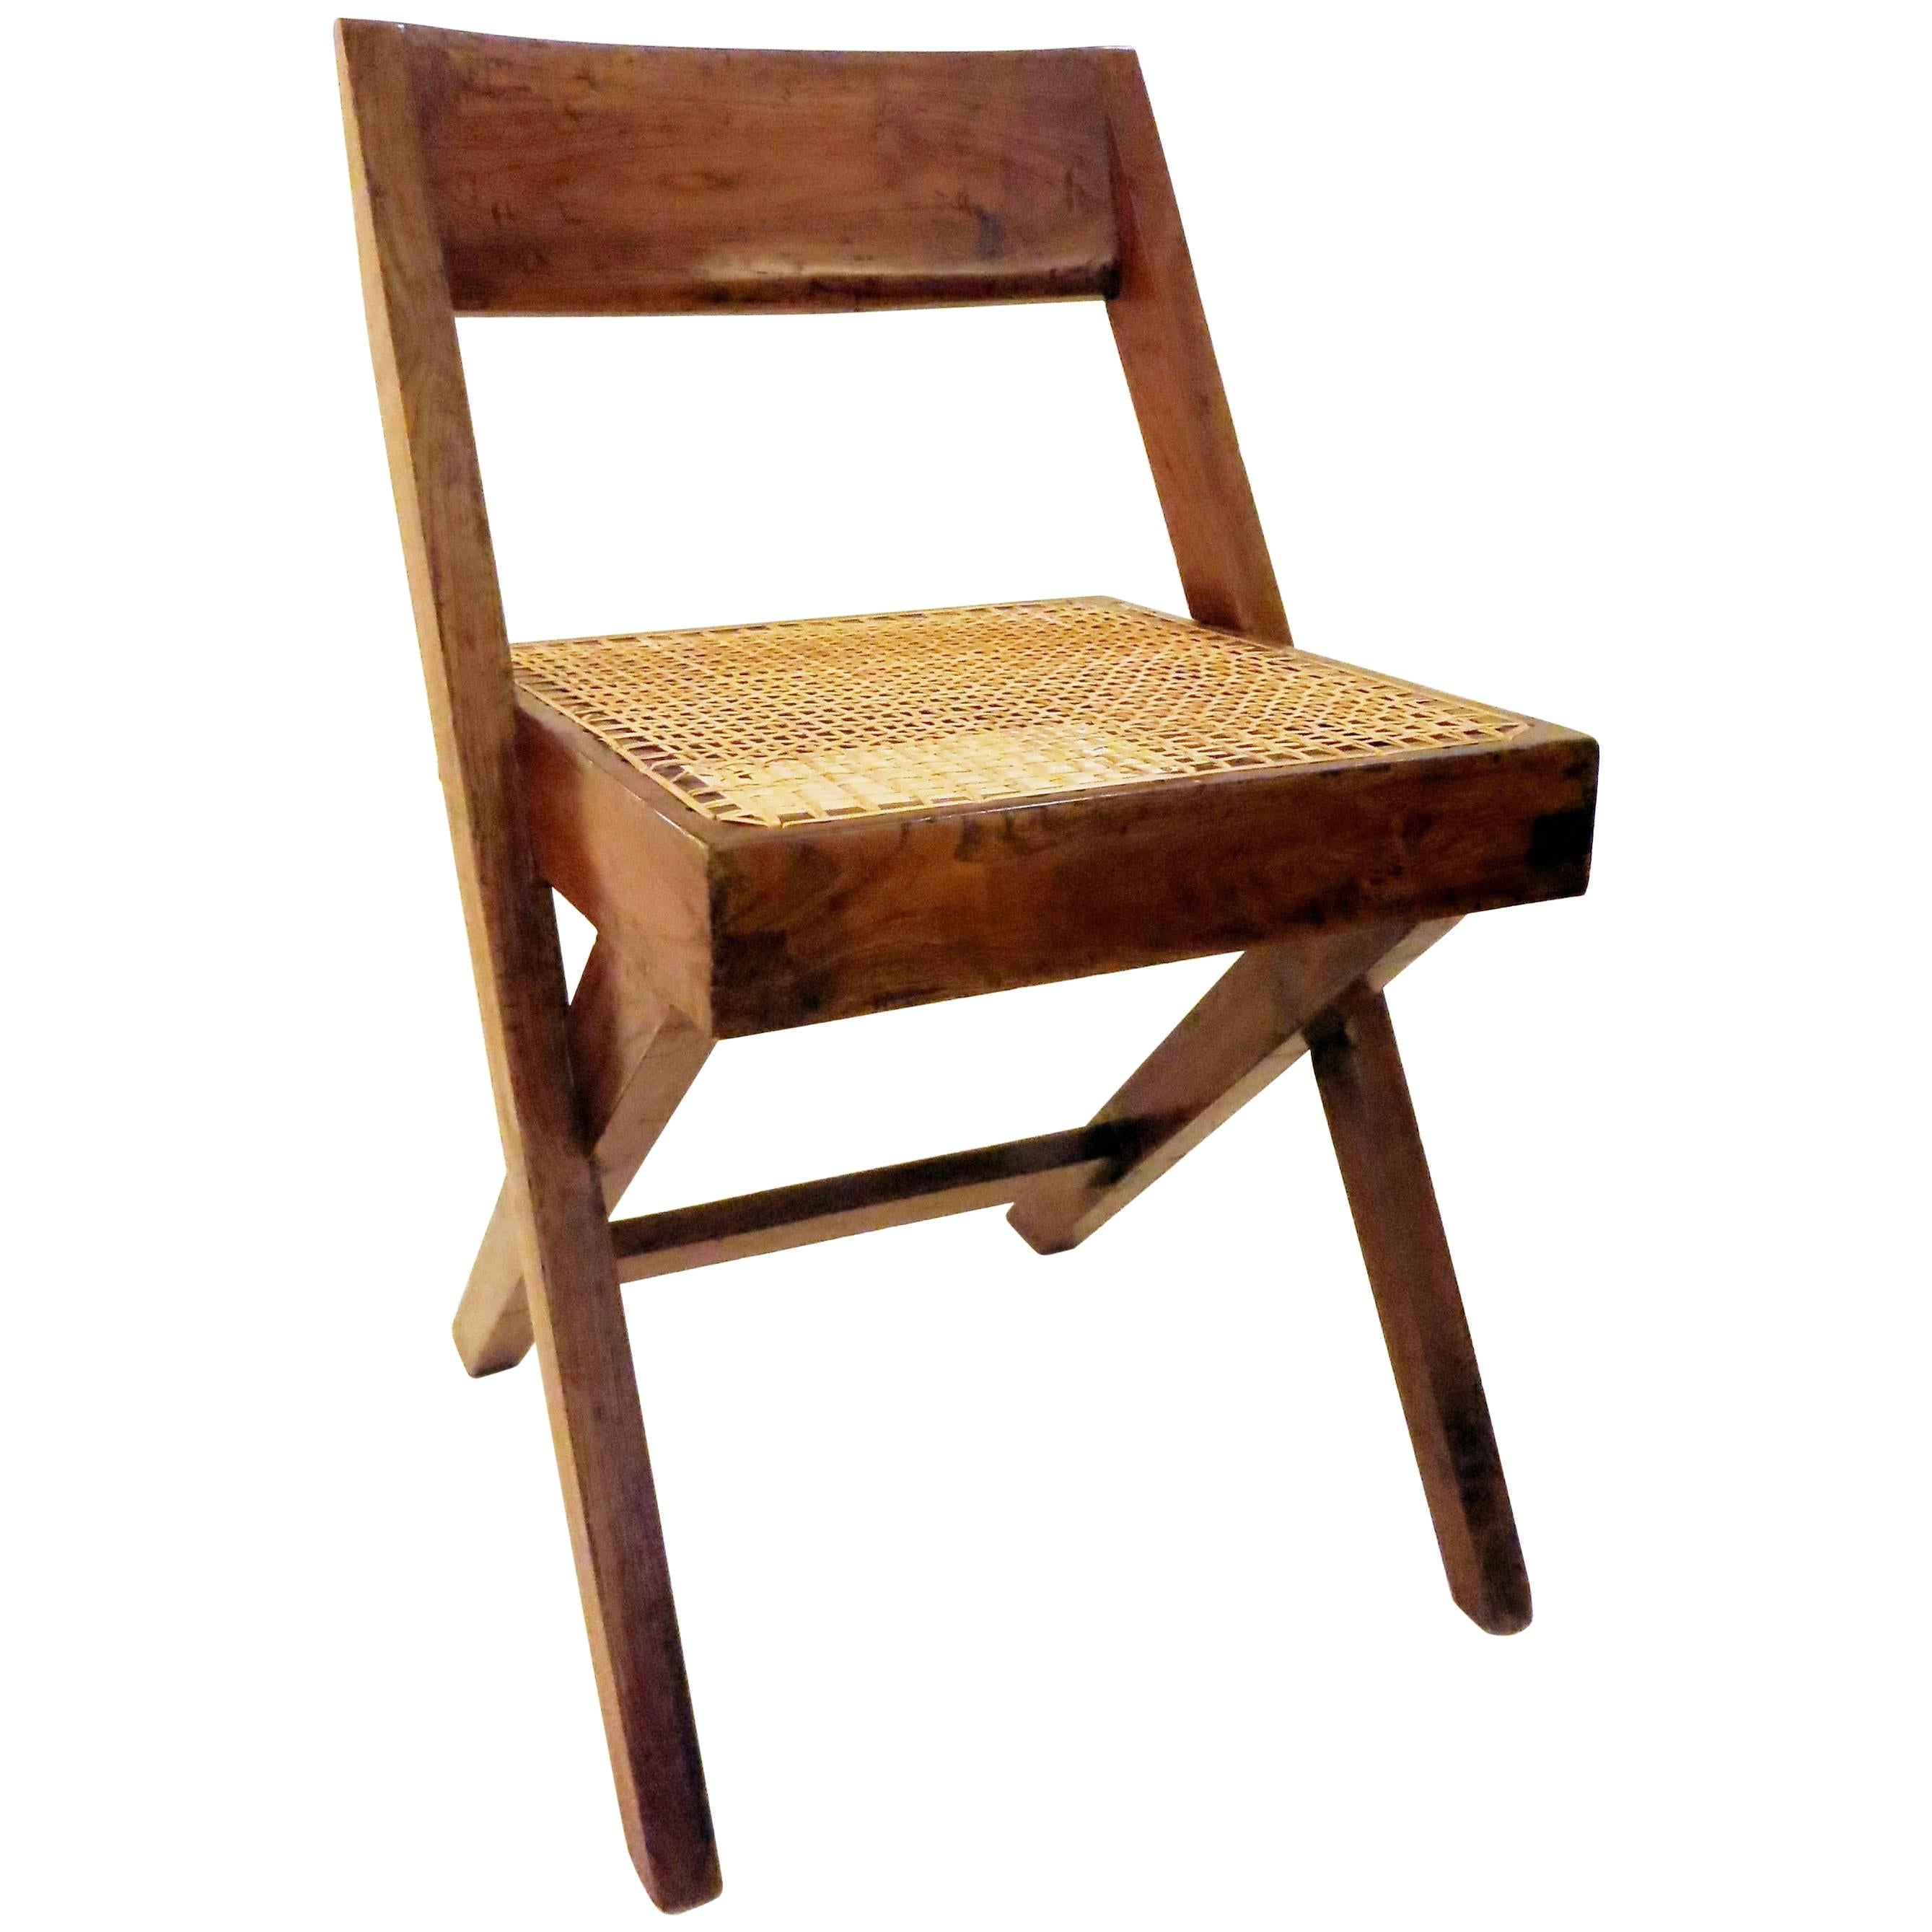 Pierre Jeanneret Library Chair, 1950s